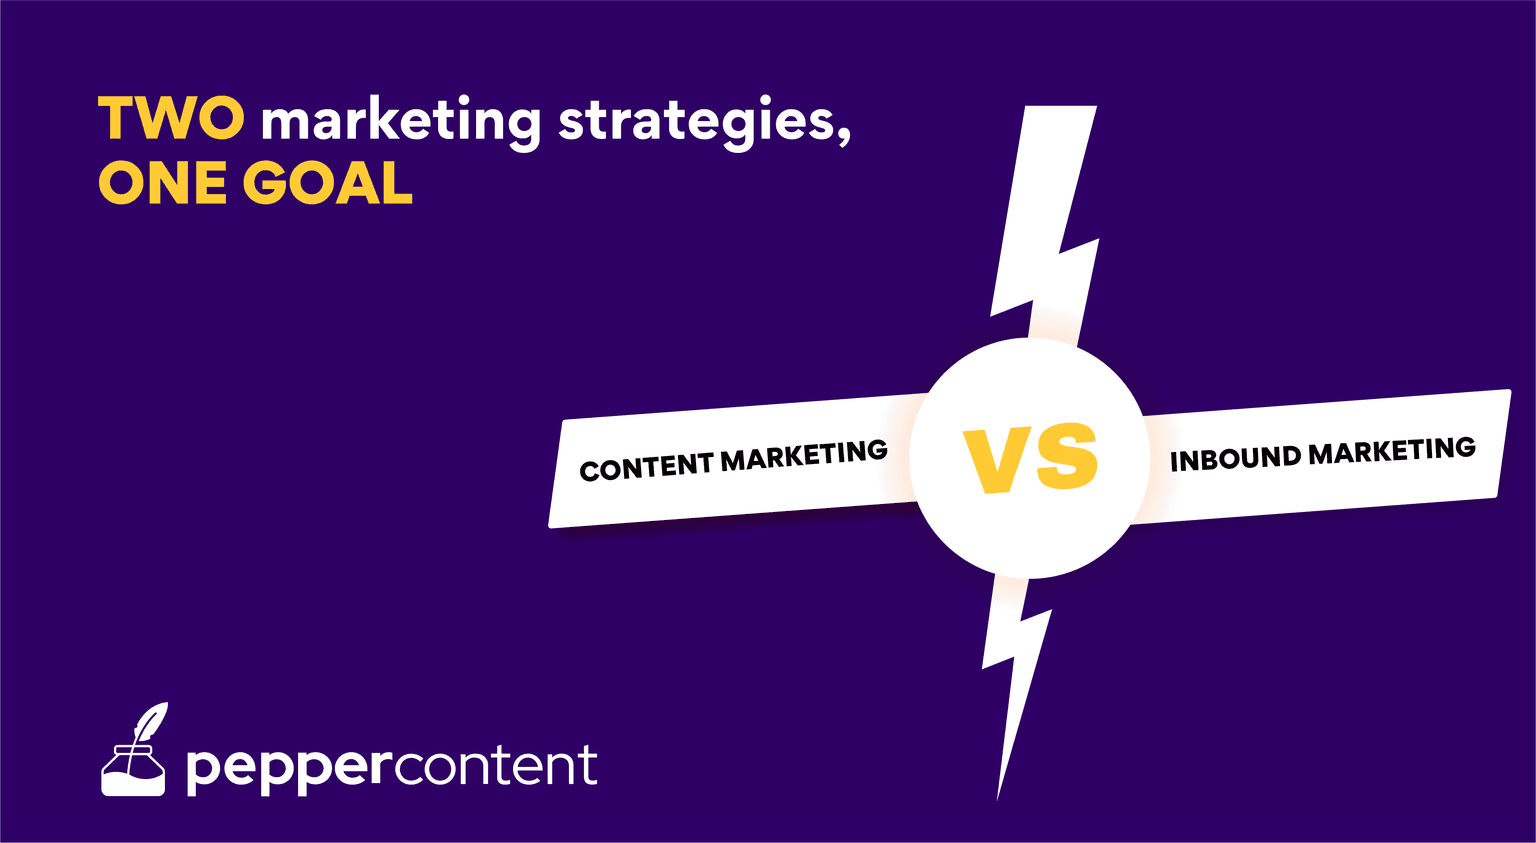 Content Marketing Vs Inbound Marketing: The Differences and Similarities Every Marketer Needs to Know